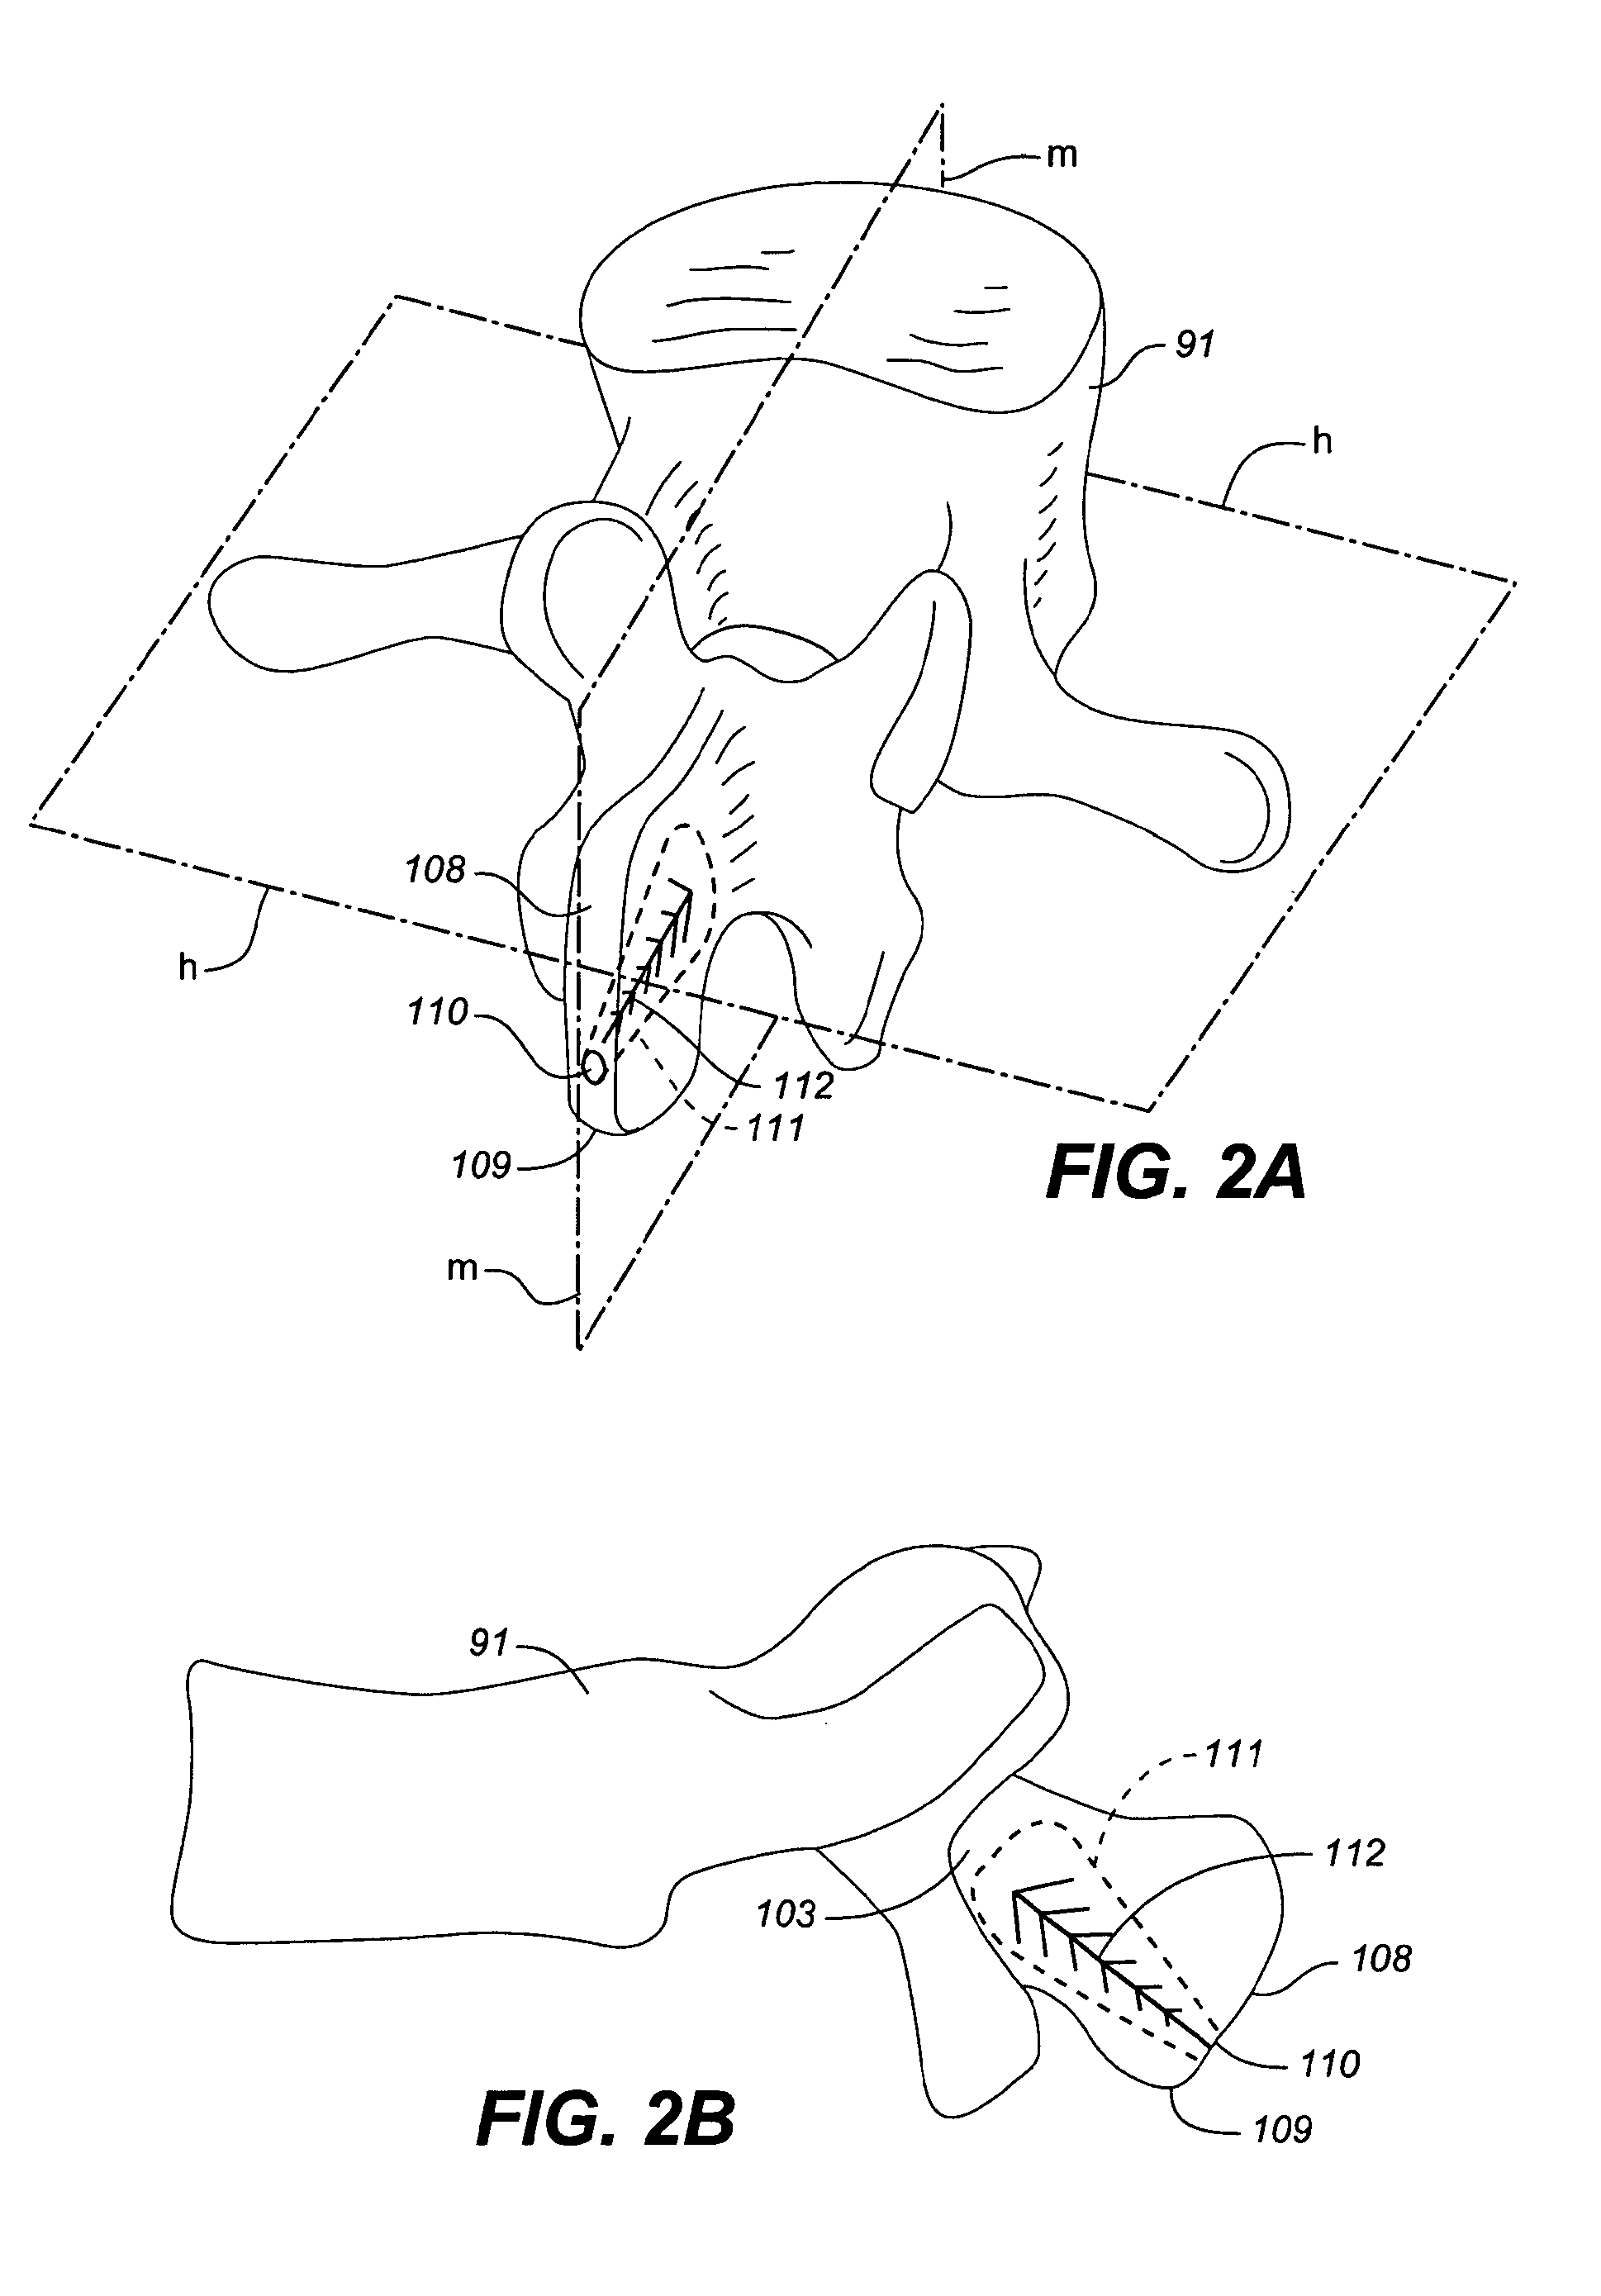 Adjustable spinal implant device and method